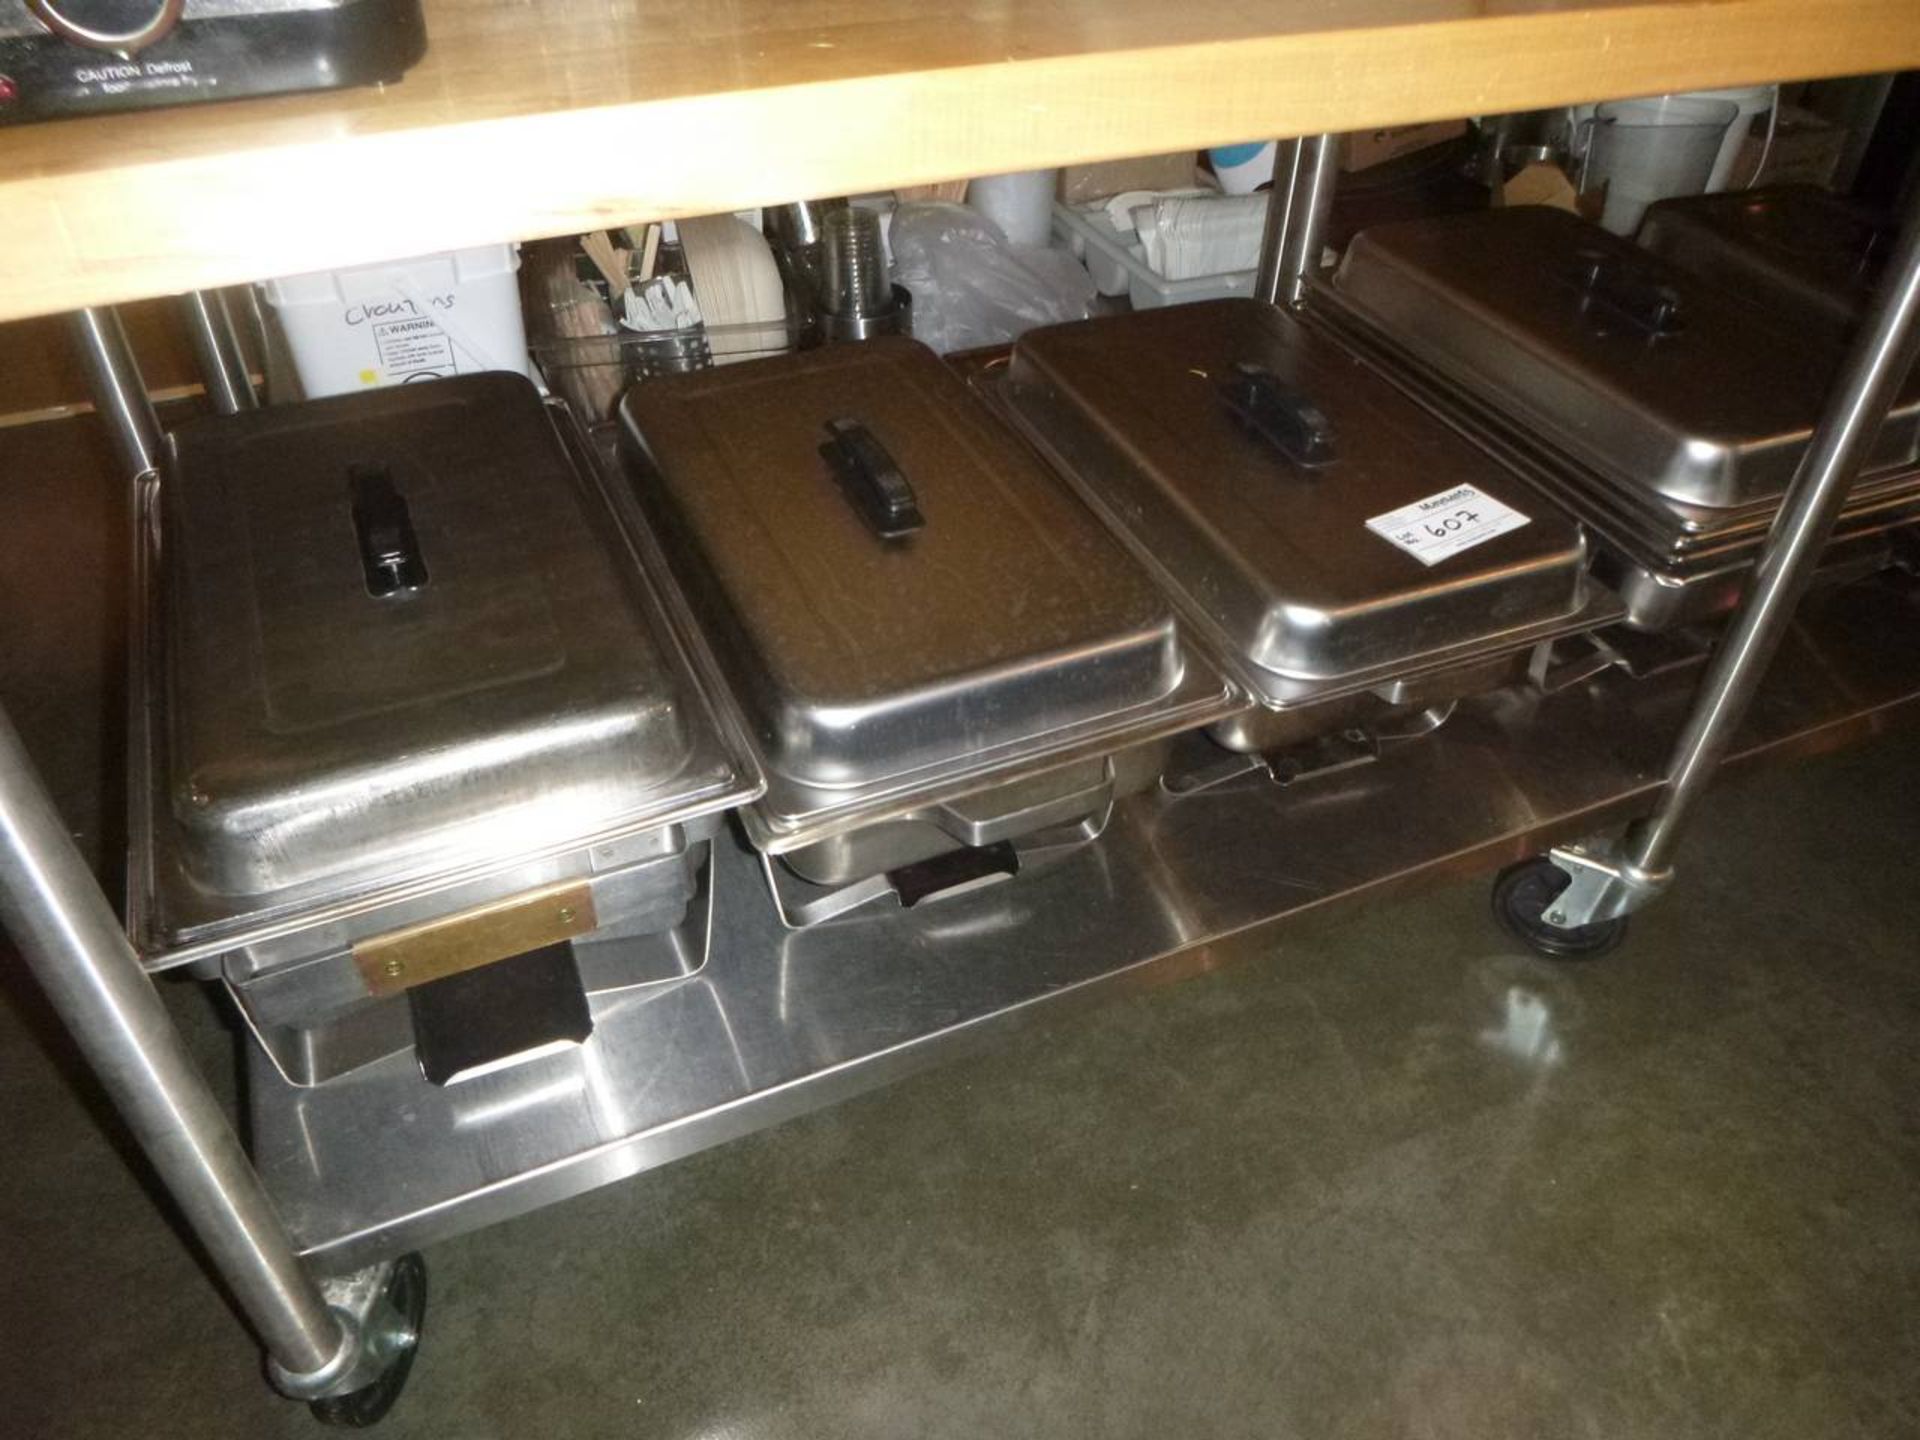 Lot warming trays under table